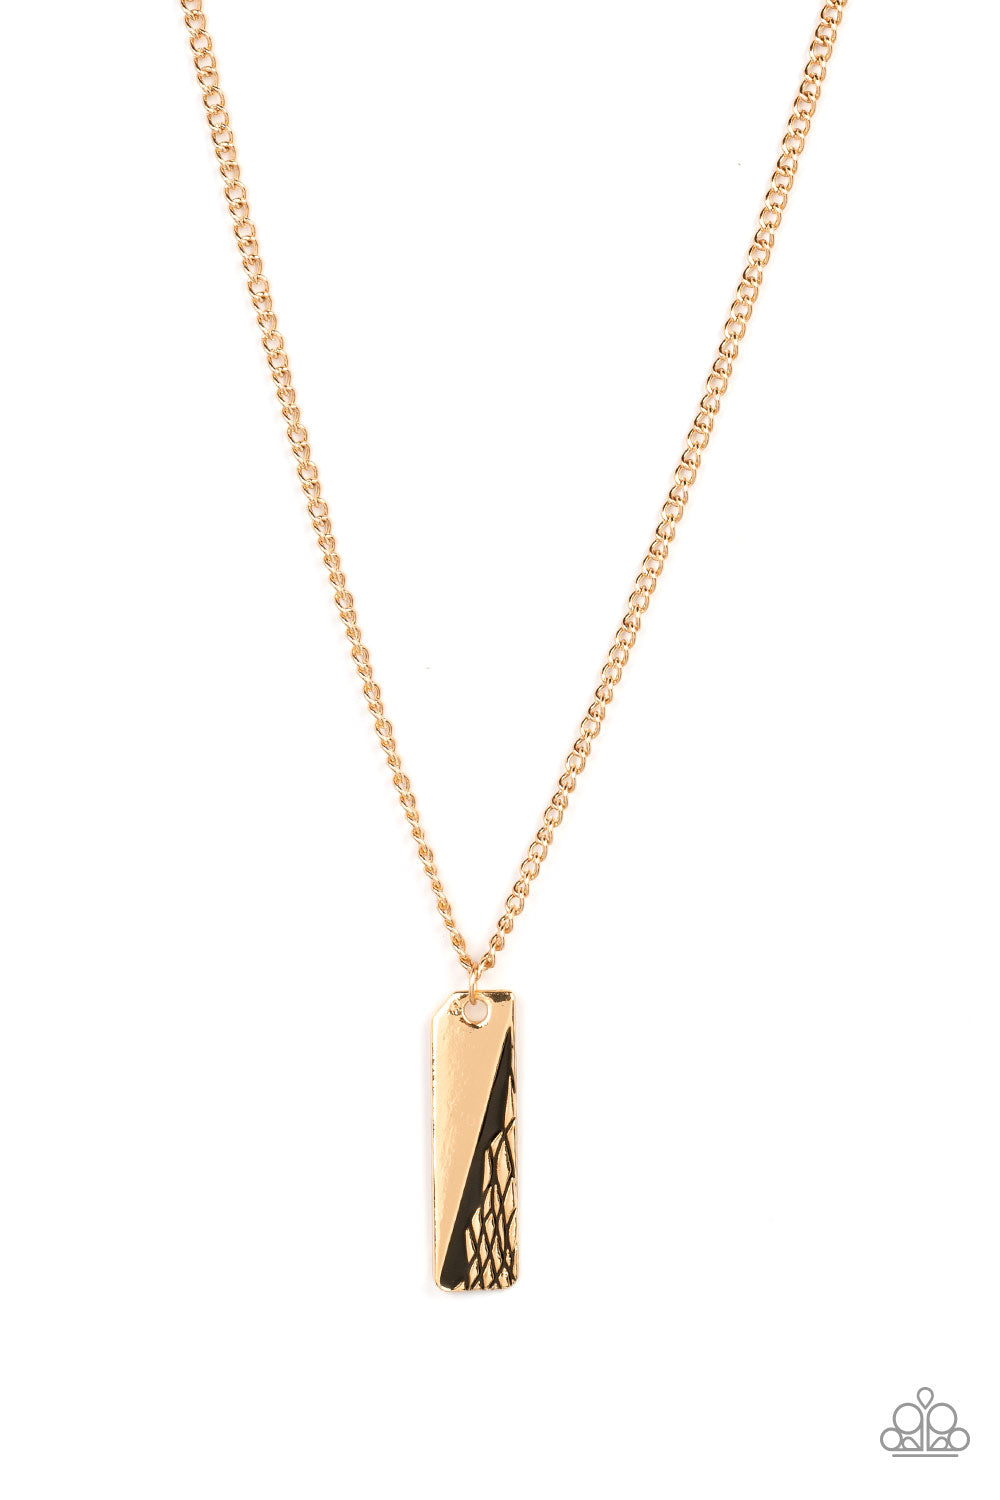 Tag Along - Gold Necklace - Paparazzi Accessories